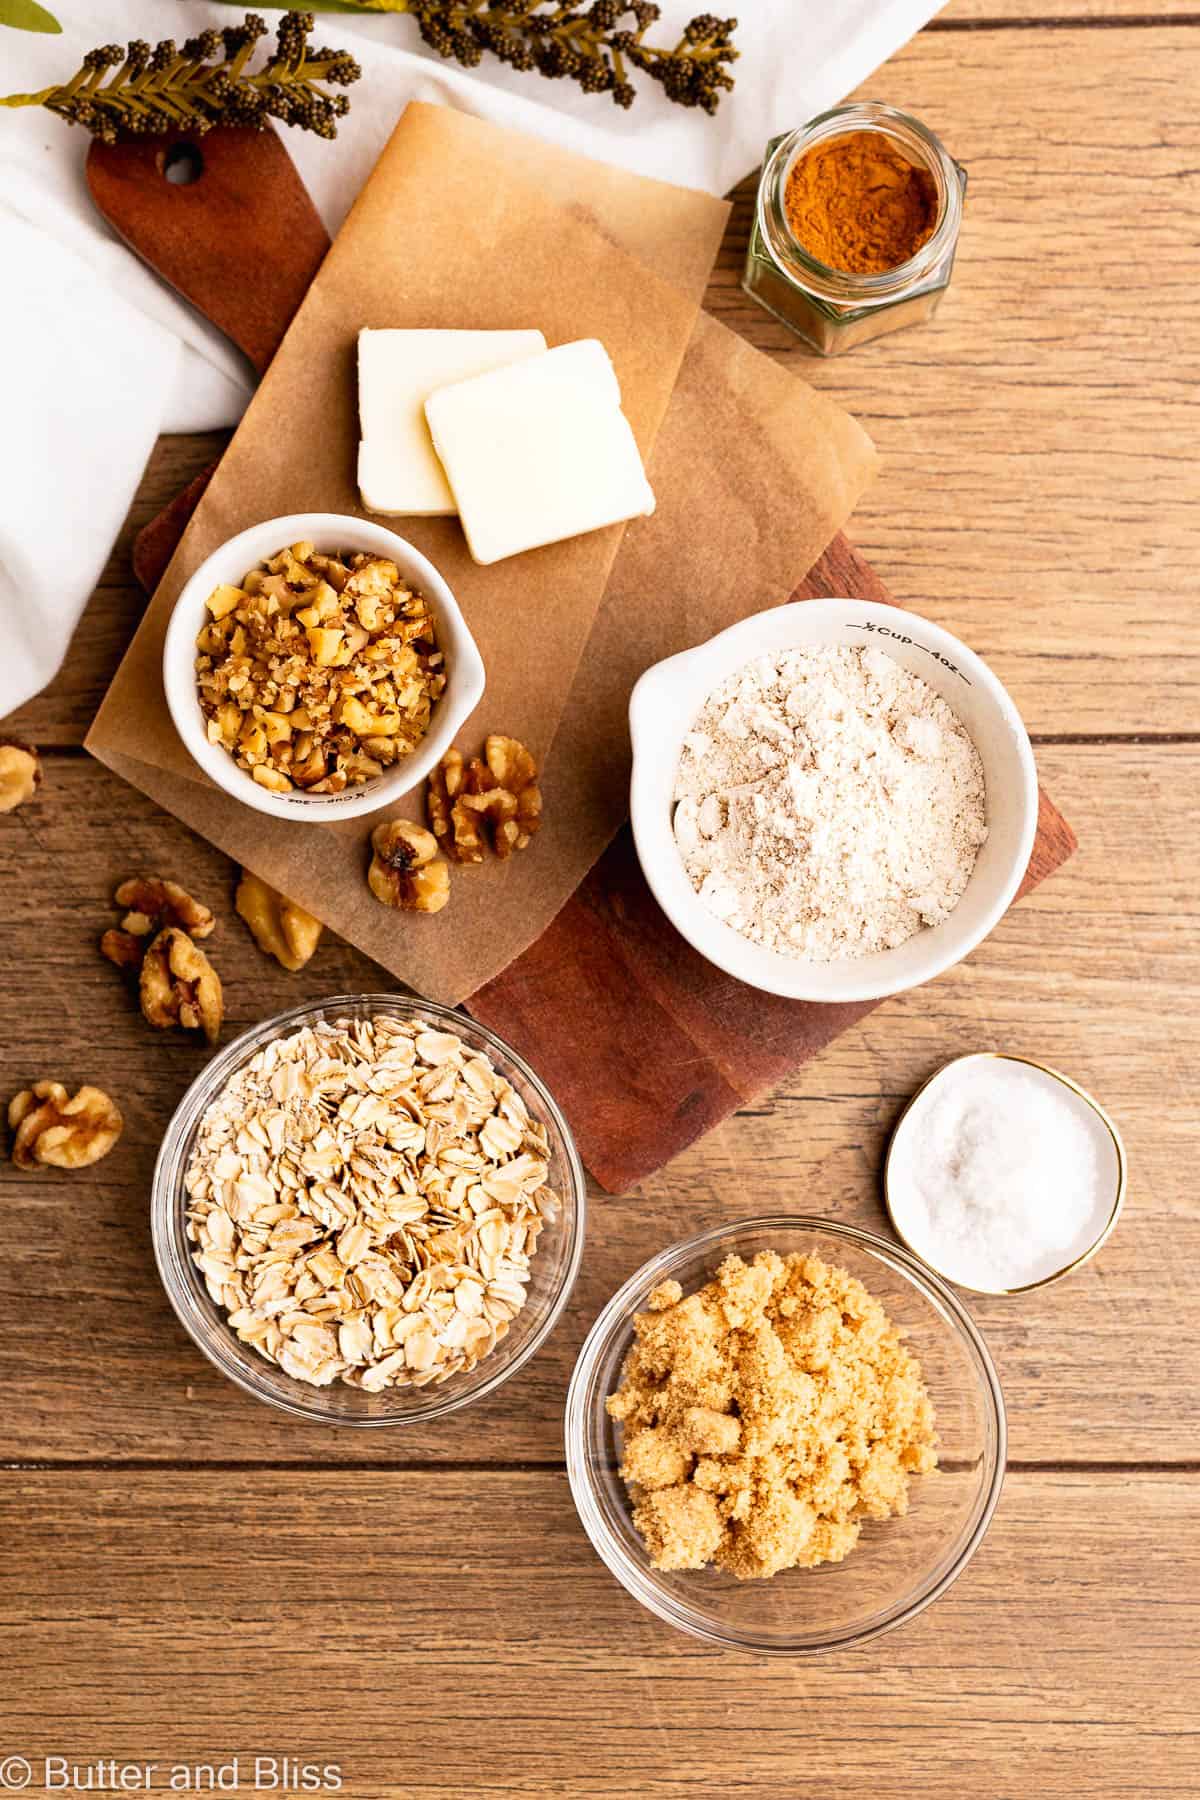 Ingredients for a buttery streusel in small bowls and arranged on a wood table.